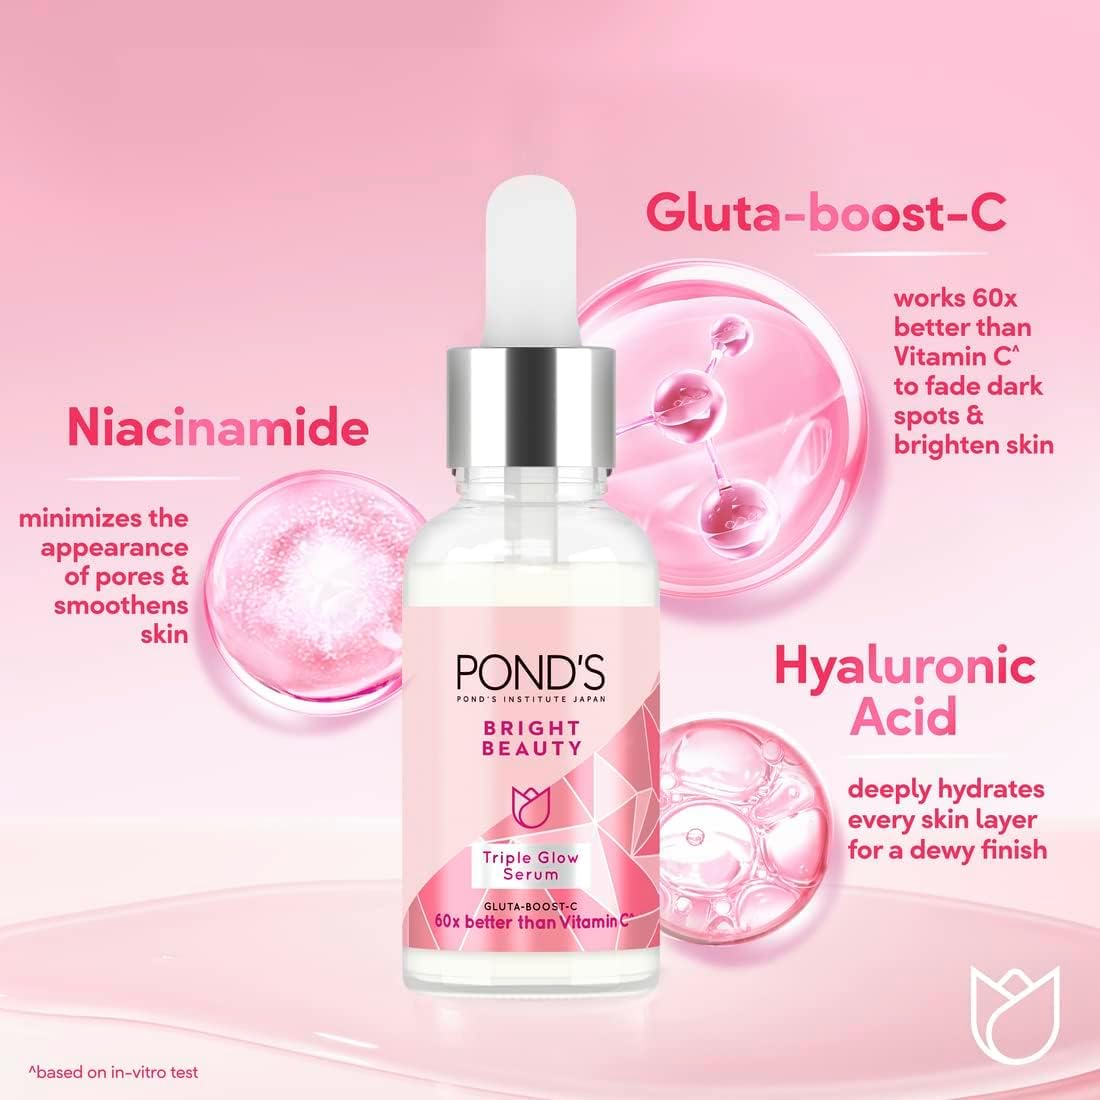 Pond's Bright Beauty Face Serum Brightens, Smoothens & Hydrates, Triple Glow Moisturizer with Niacinamide (Vitamin B3), Hyaluronic Acid and Gluta-Boost-C, 30g